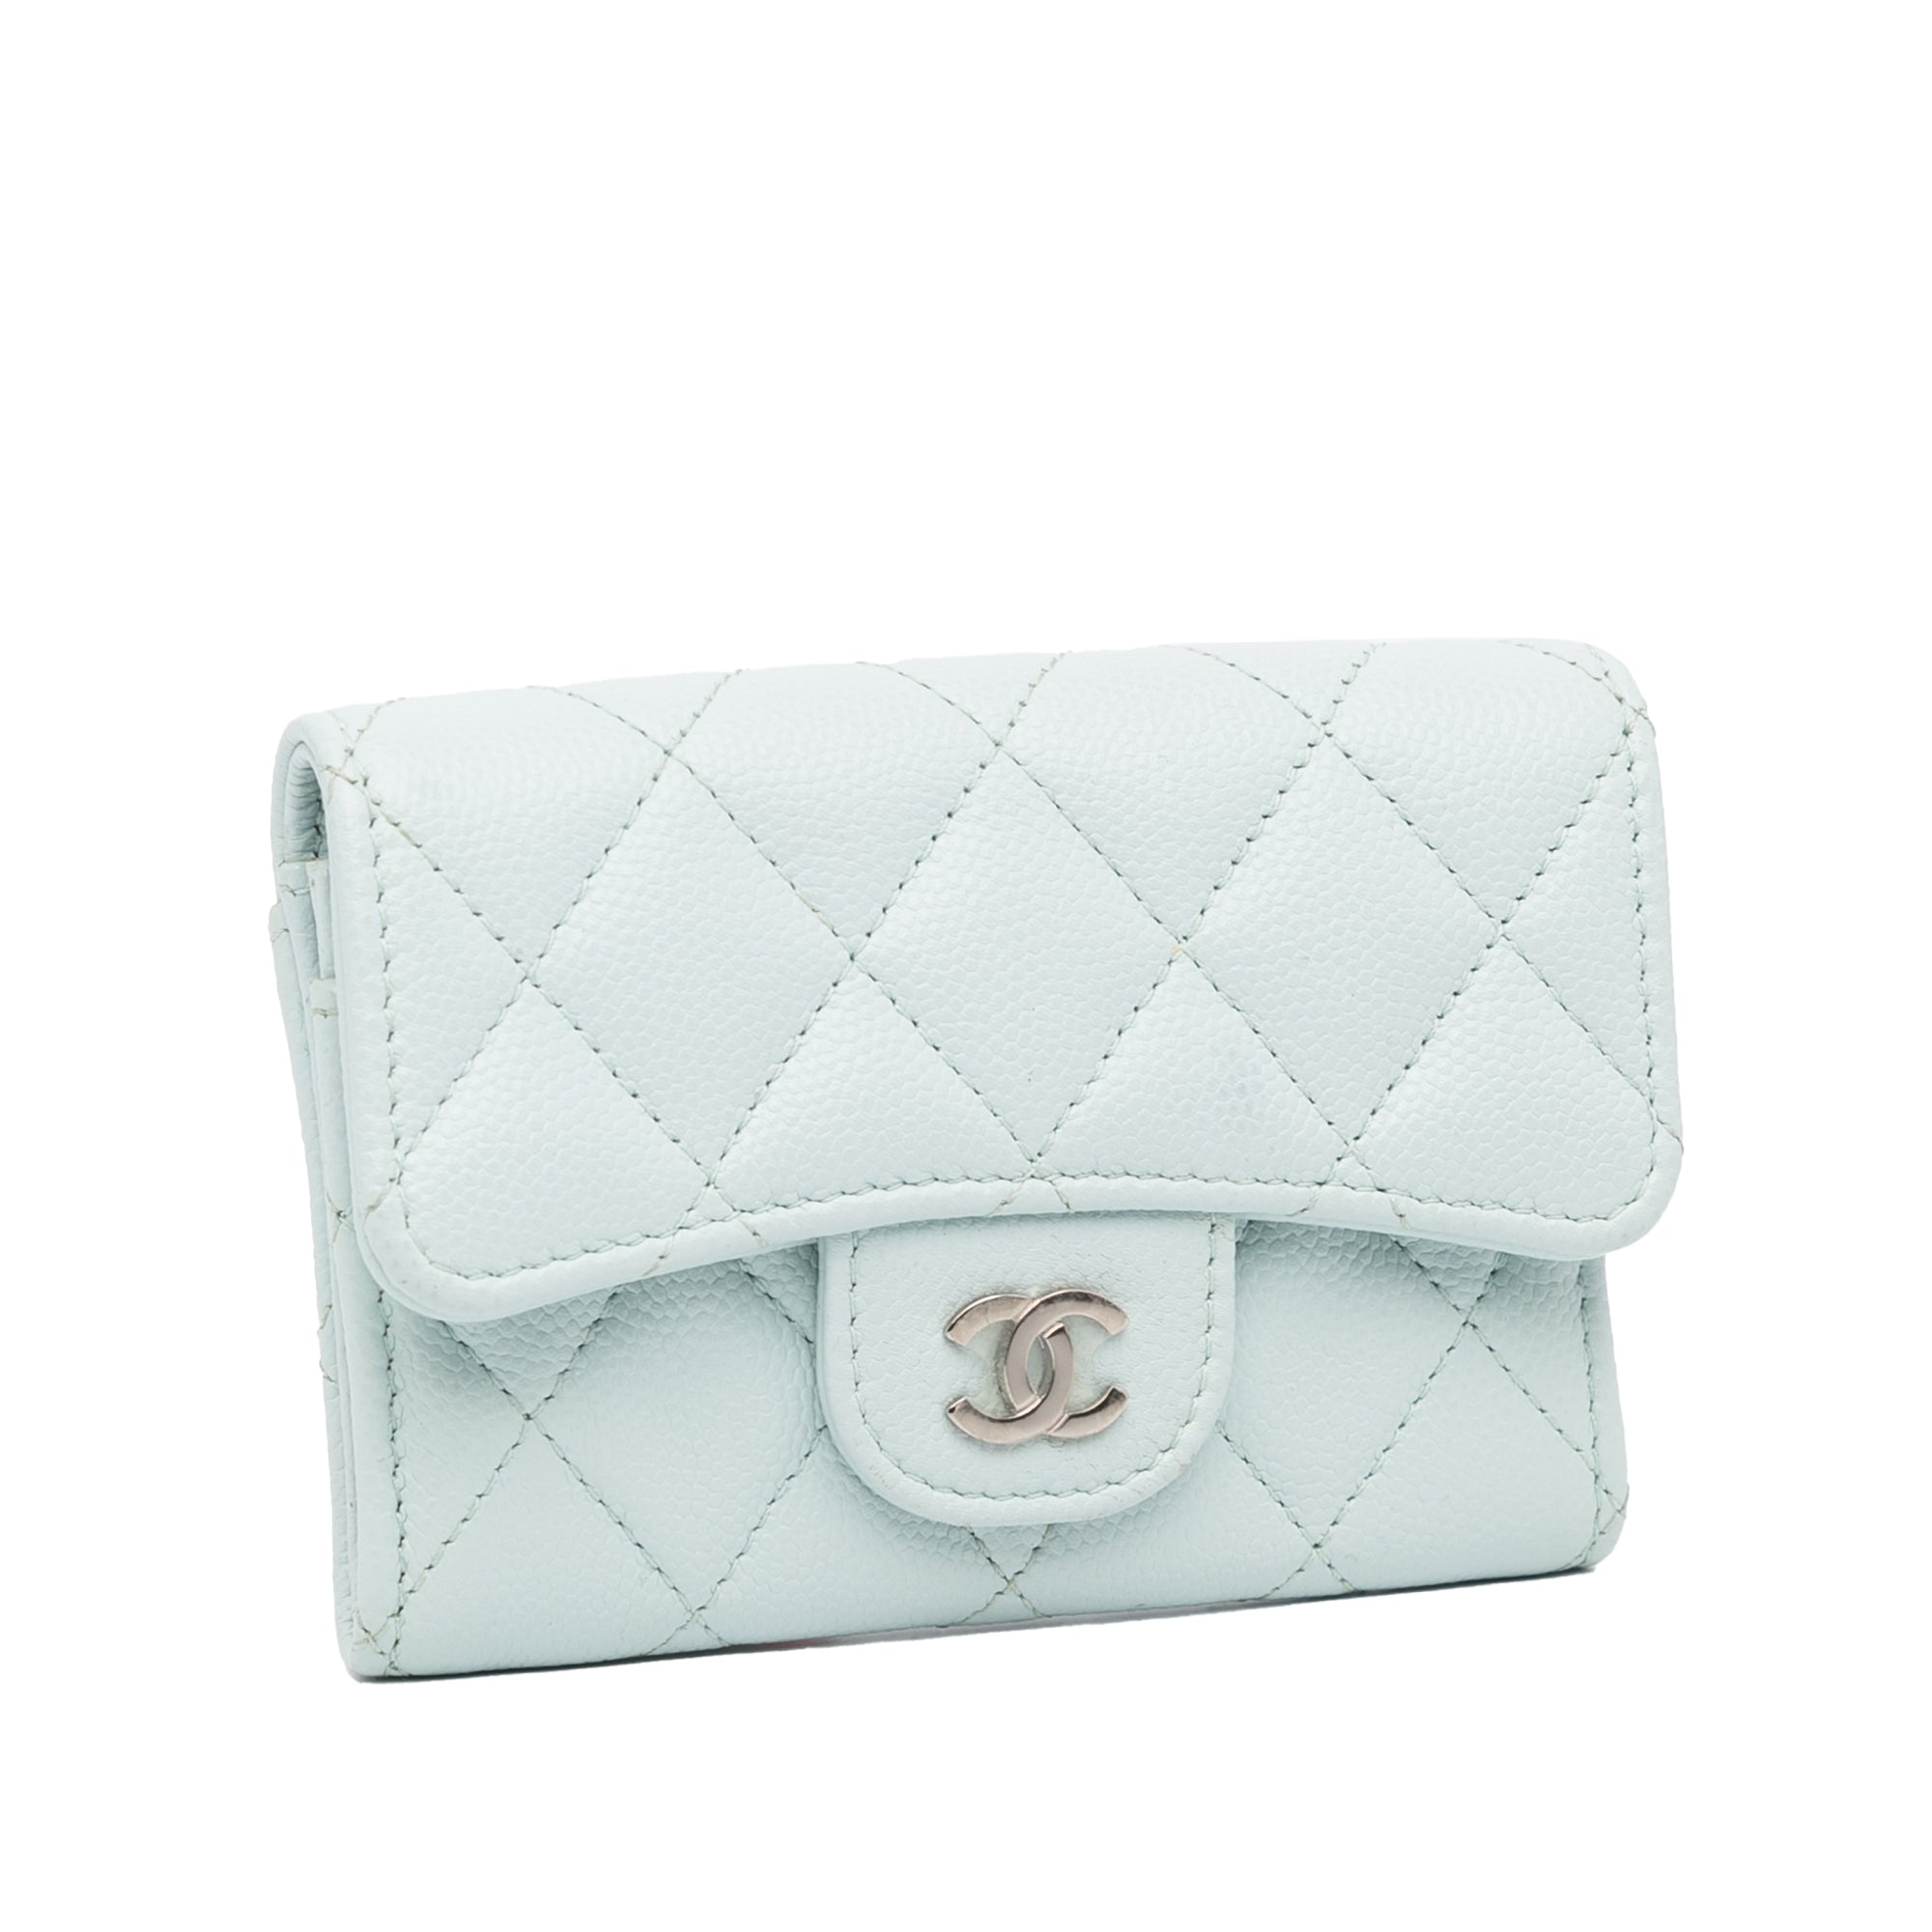 CHANEL, Bags, Chanel Caviar Card Holder Wallet